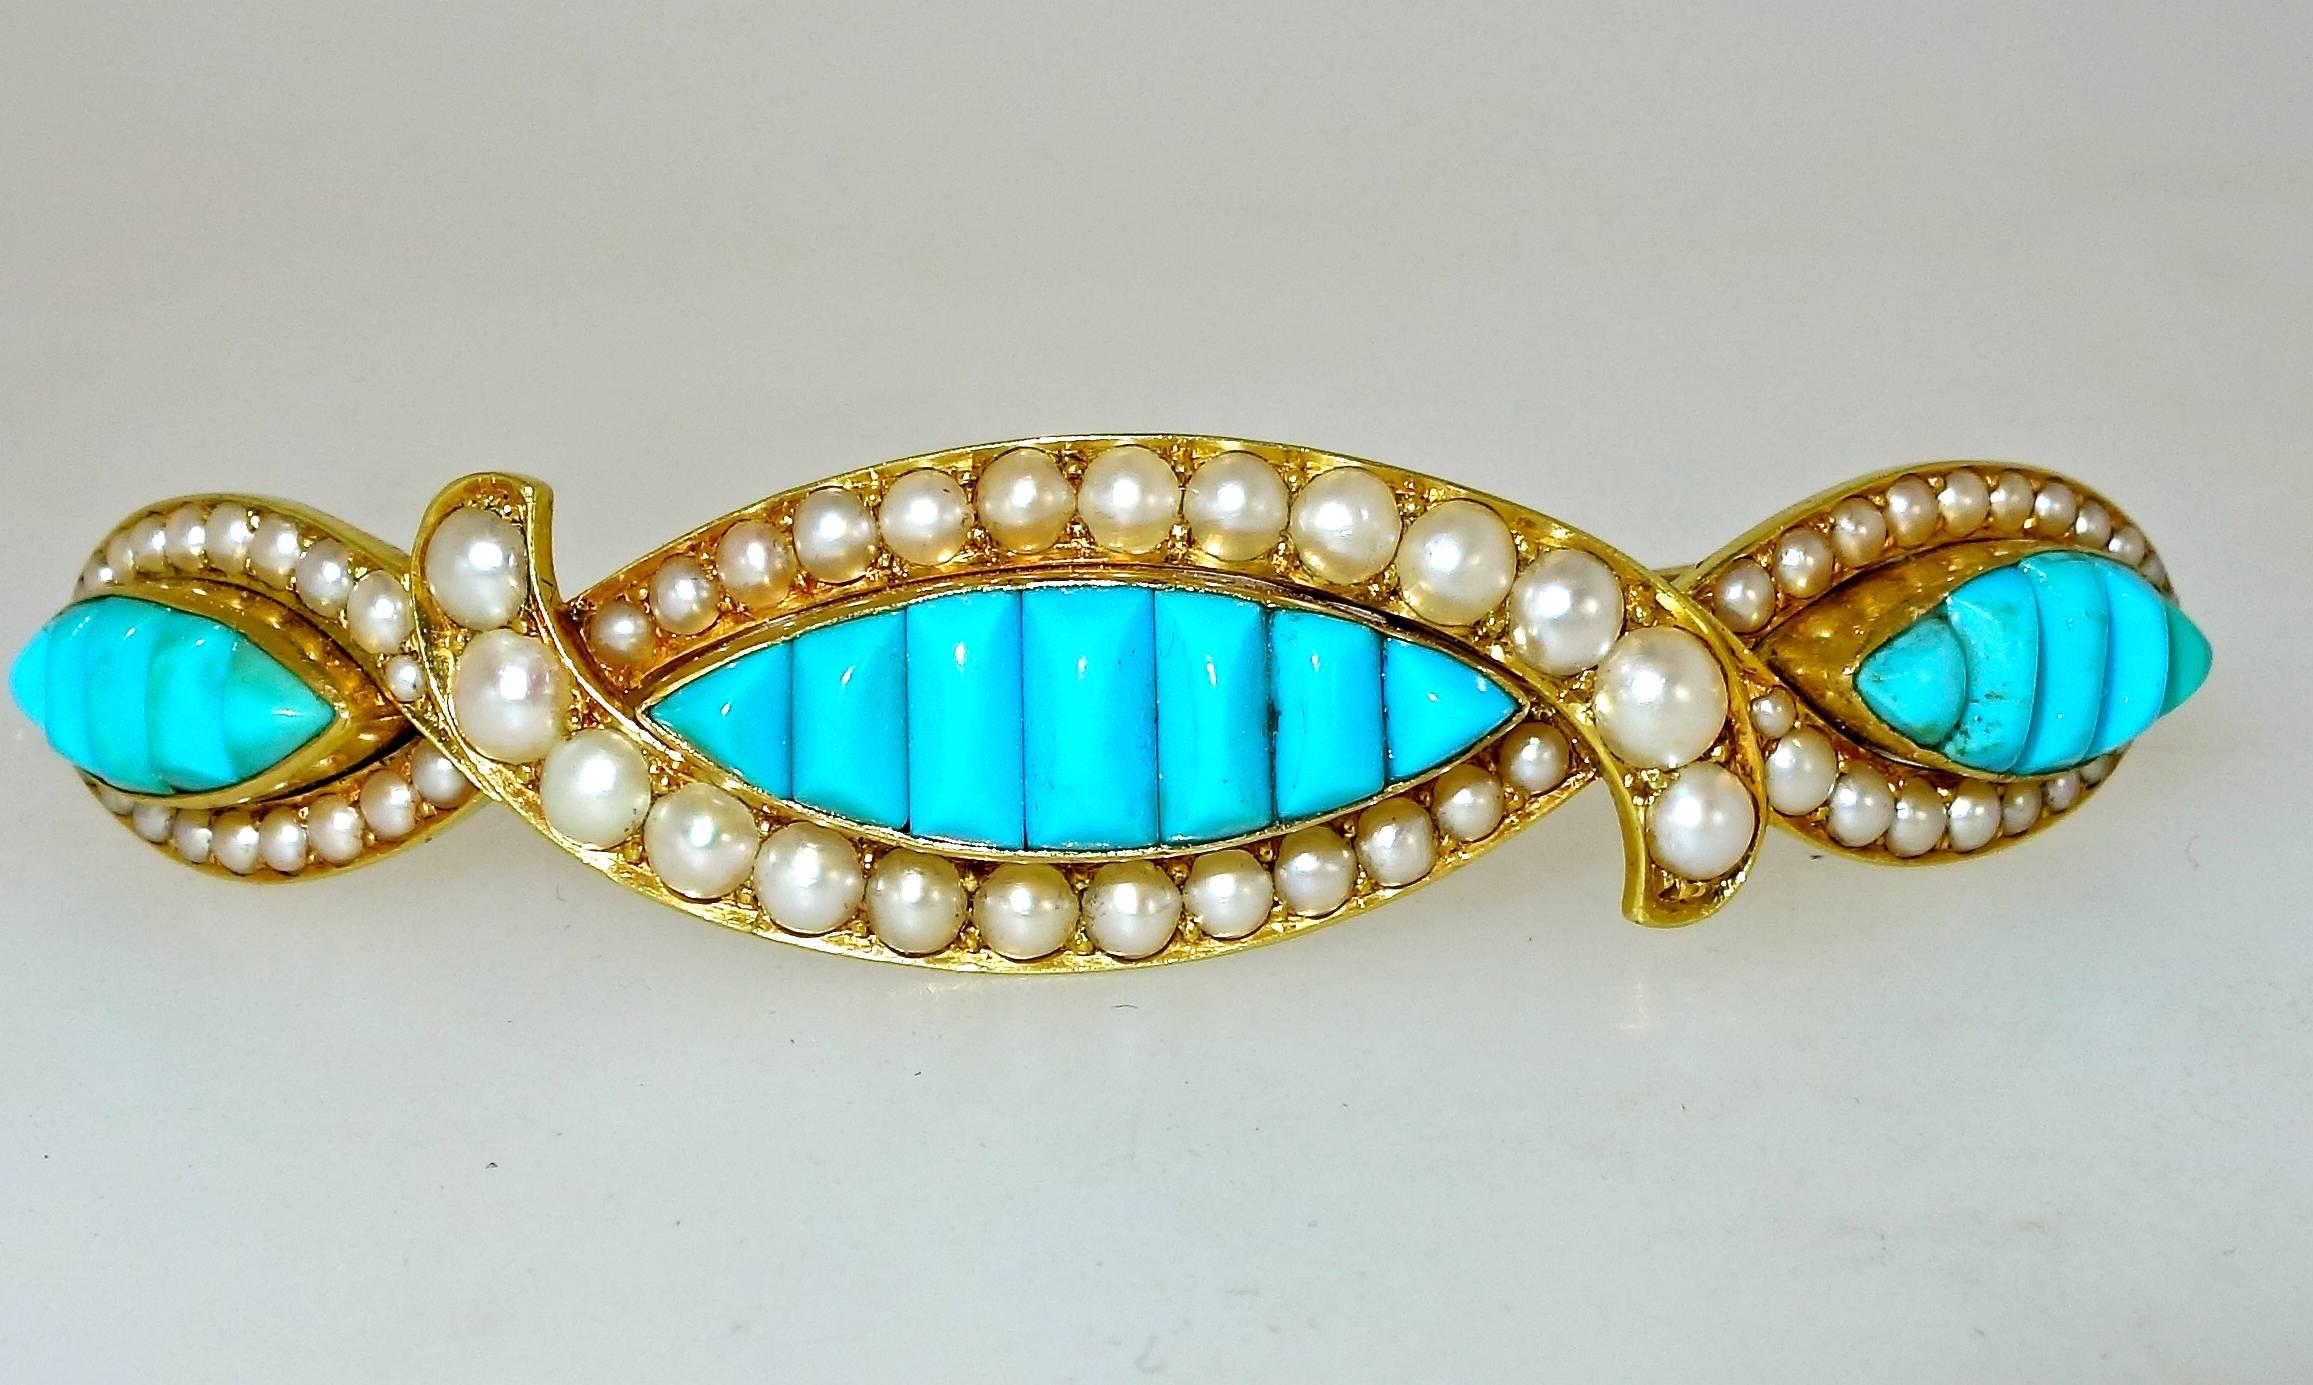 Women's Hair Barrette 19th Century Natural Persian Turquoise and Natural Pearls